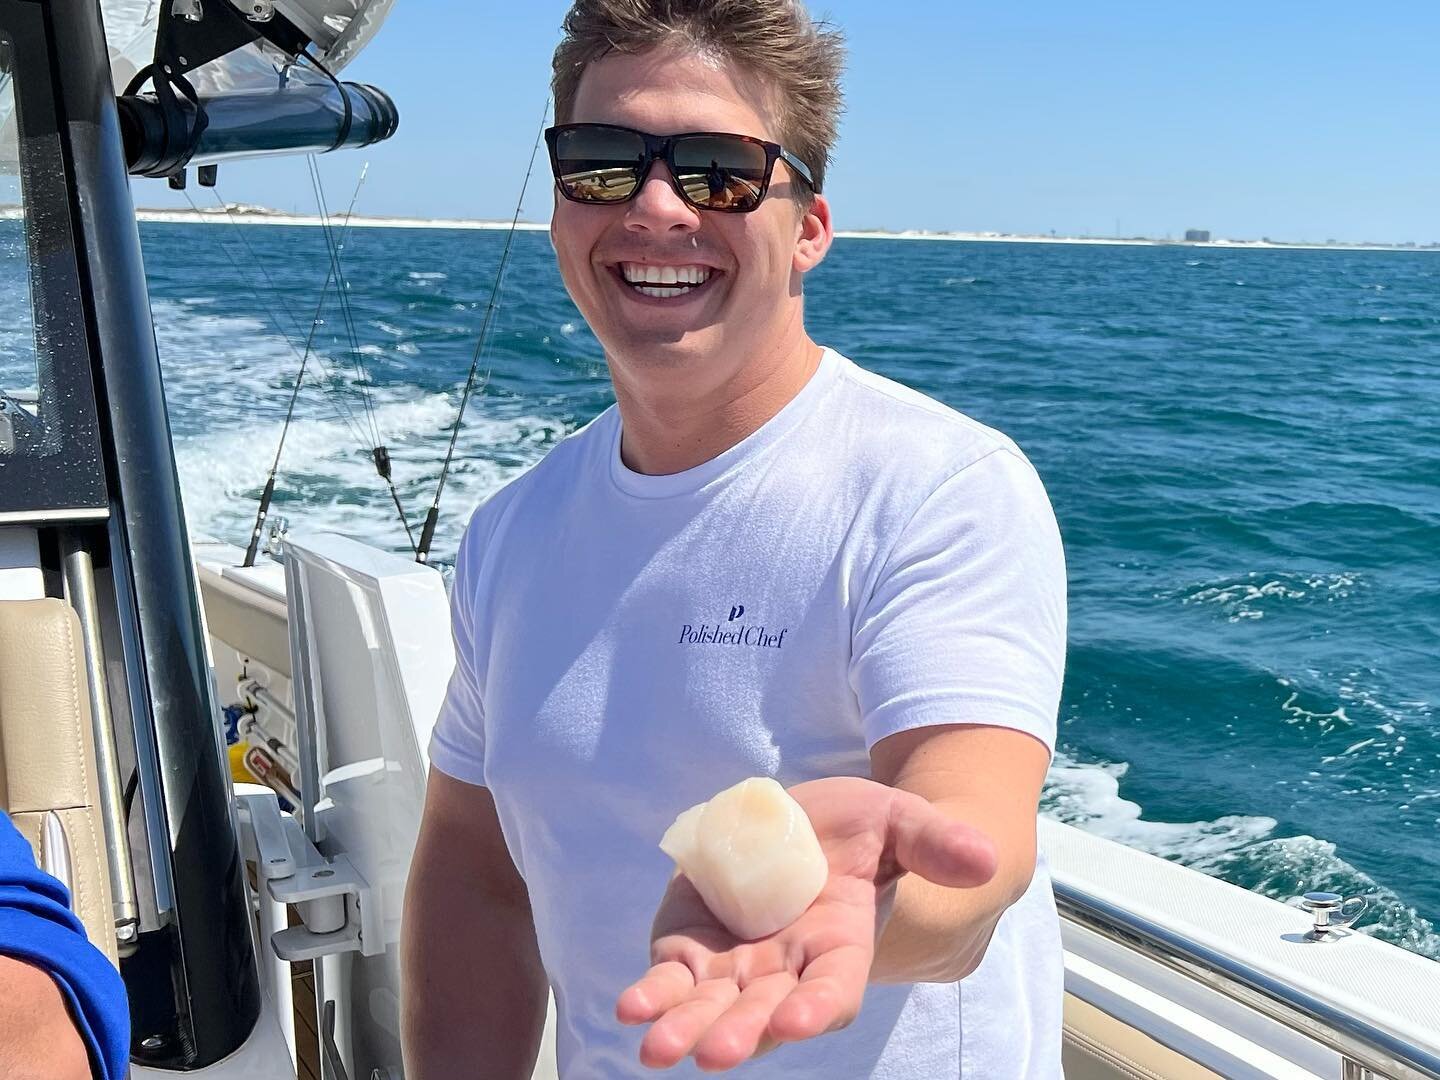 Check out these HUGE diver scallops chef Nathan is getting his hands on for dinners coming up. Always offering the best &amp; freshest selection on 30A or the beautiful waters of Destin.